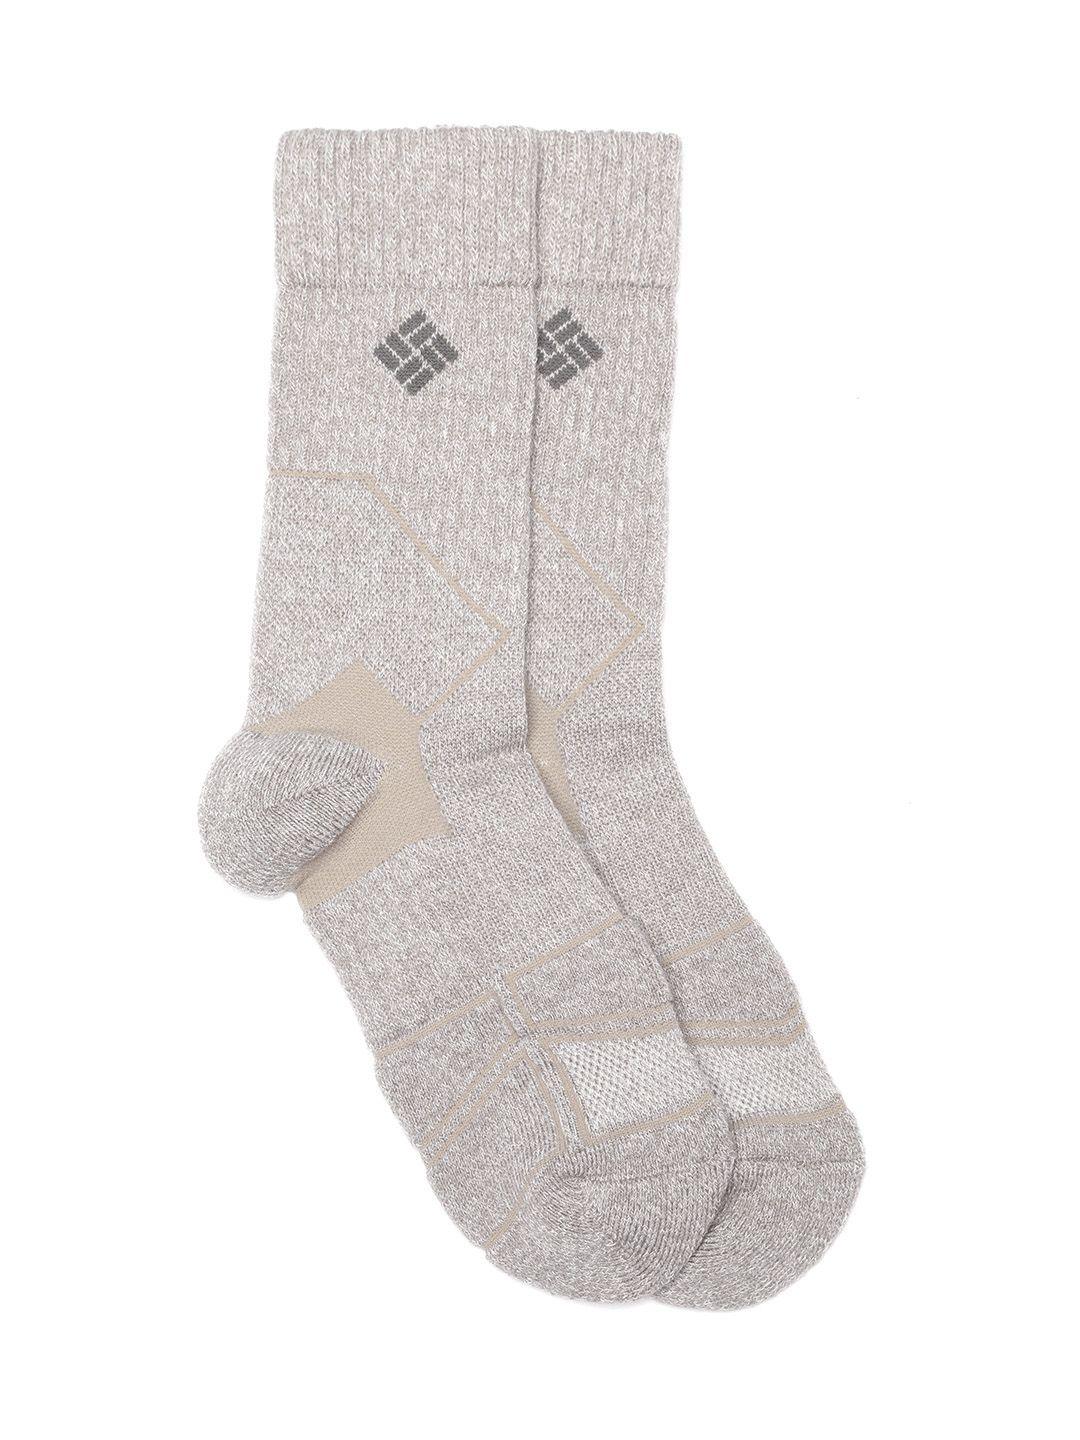 columbia unisex off-white patterned ankle length socks